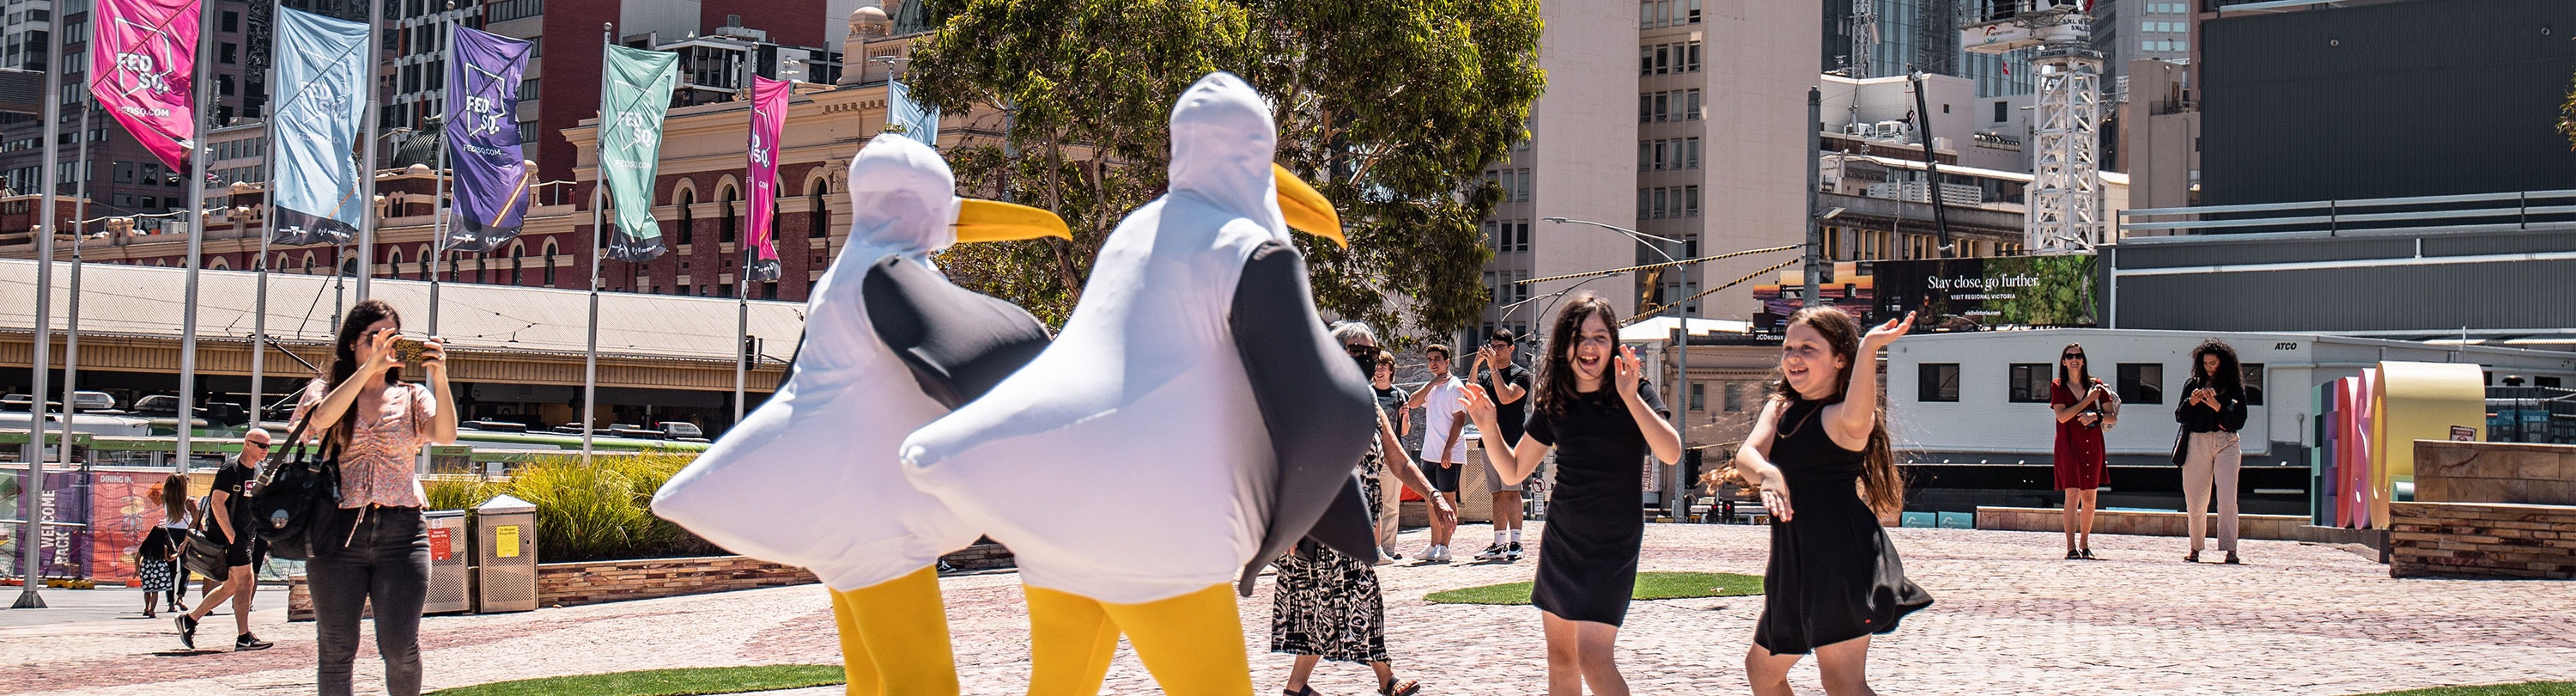 Kids dancing with Fred and Fifi the seagulls at Fed Square